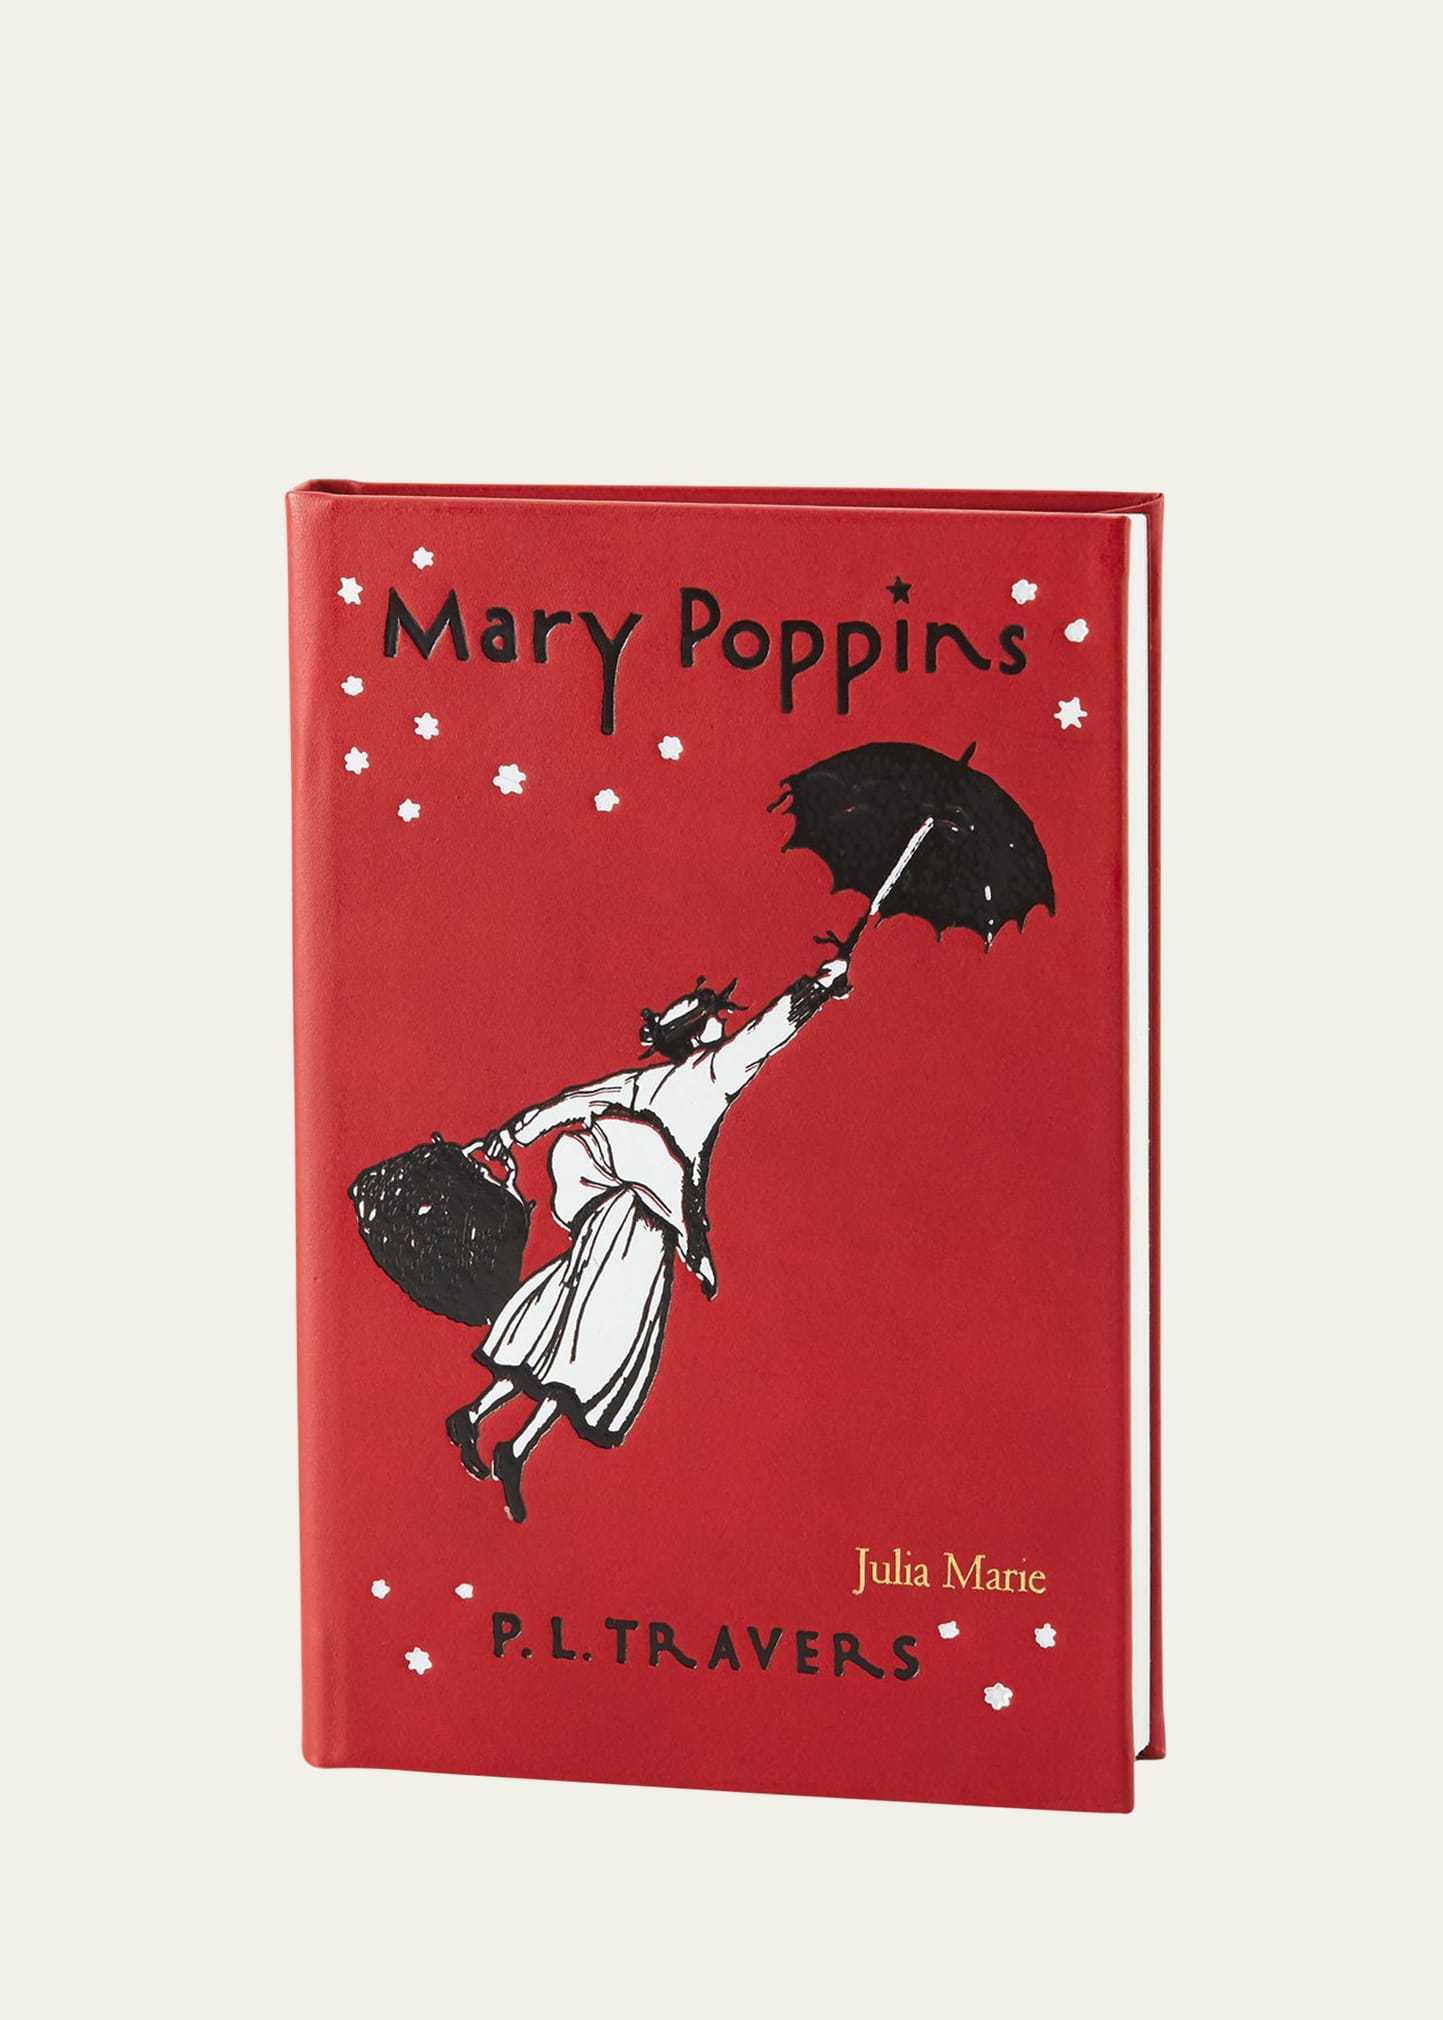 Personalized "Mary Poppins" Children's Book by P. L. Travers